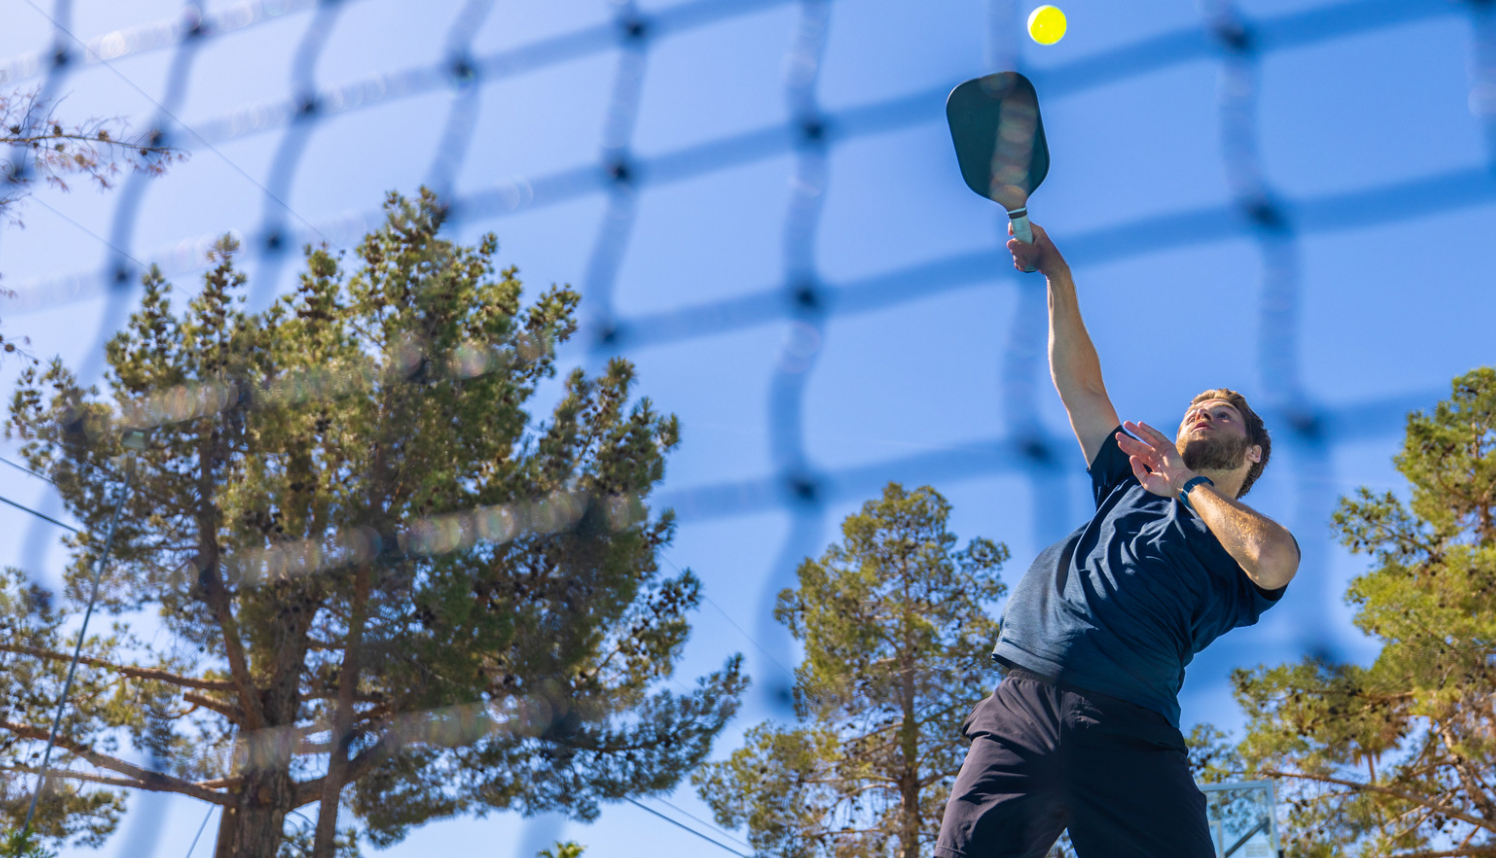 Want to Play Competitive Pickleball?